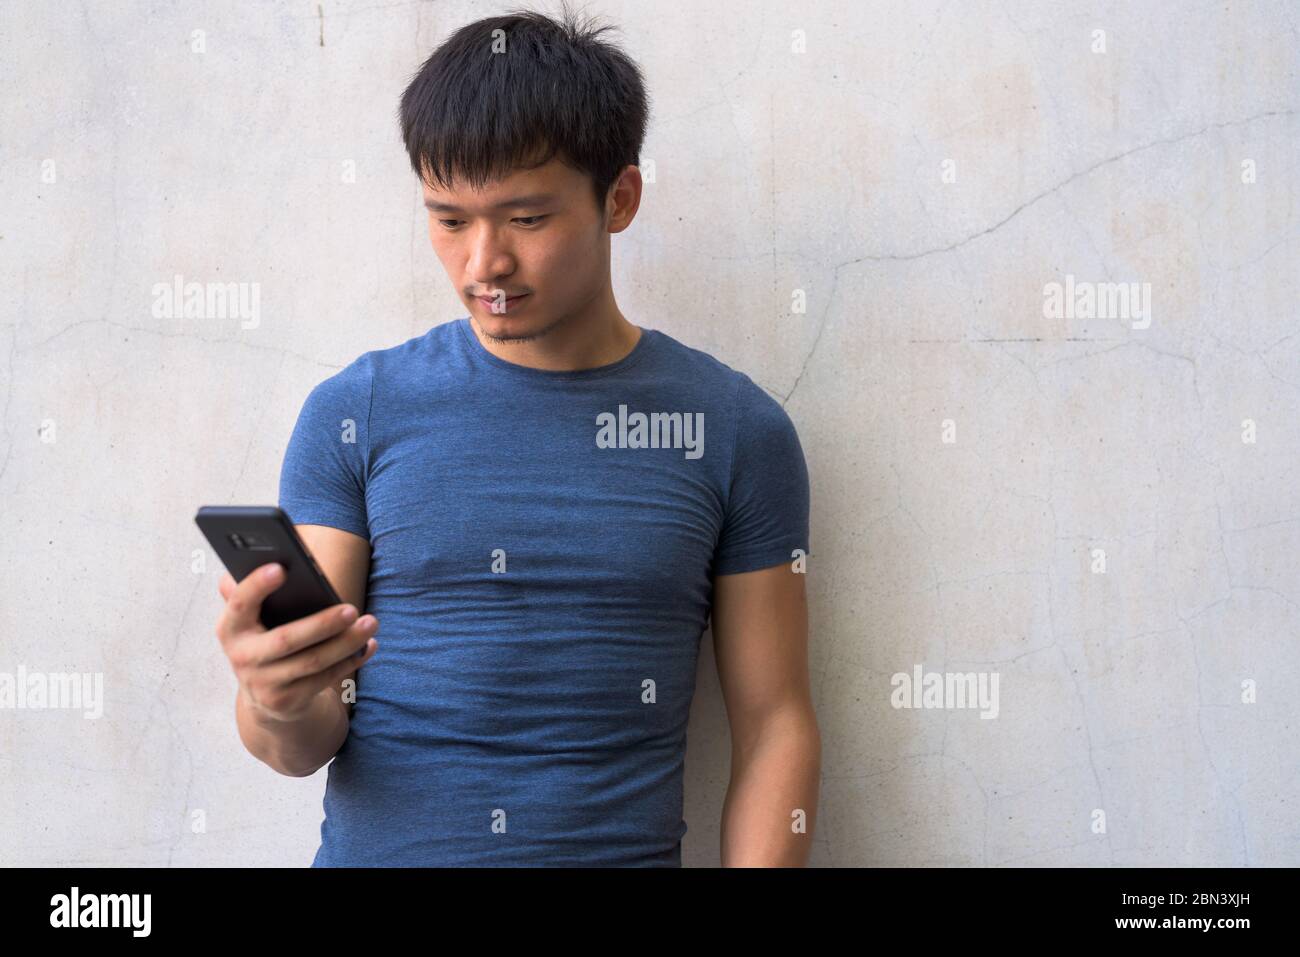 Portrait of young Asian man using phone outdoors Stock Photo